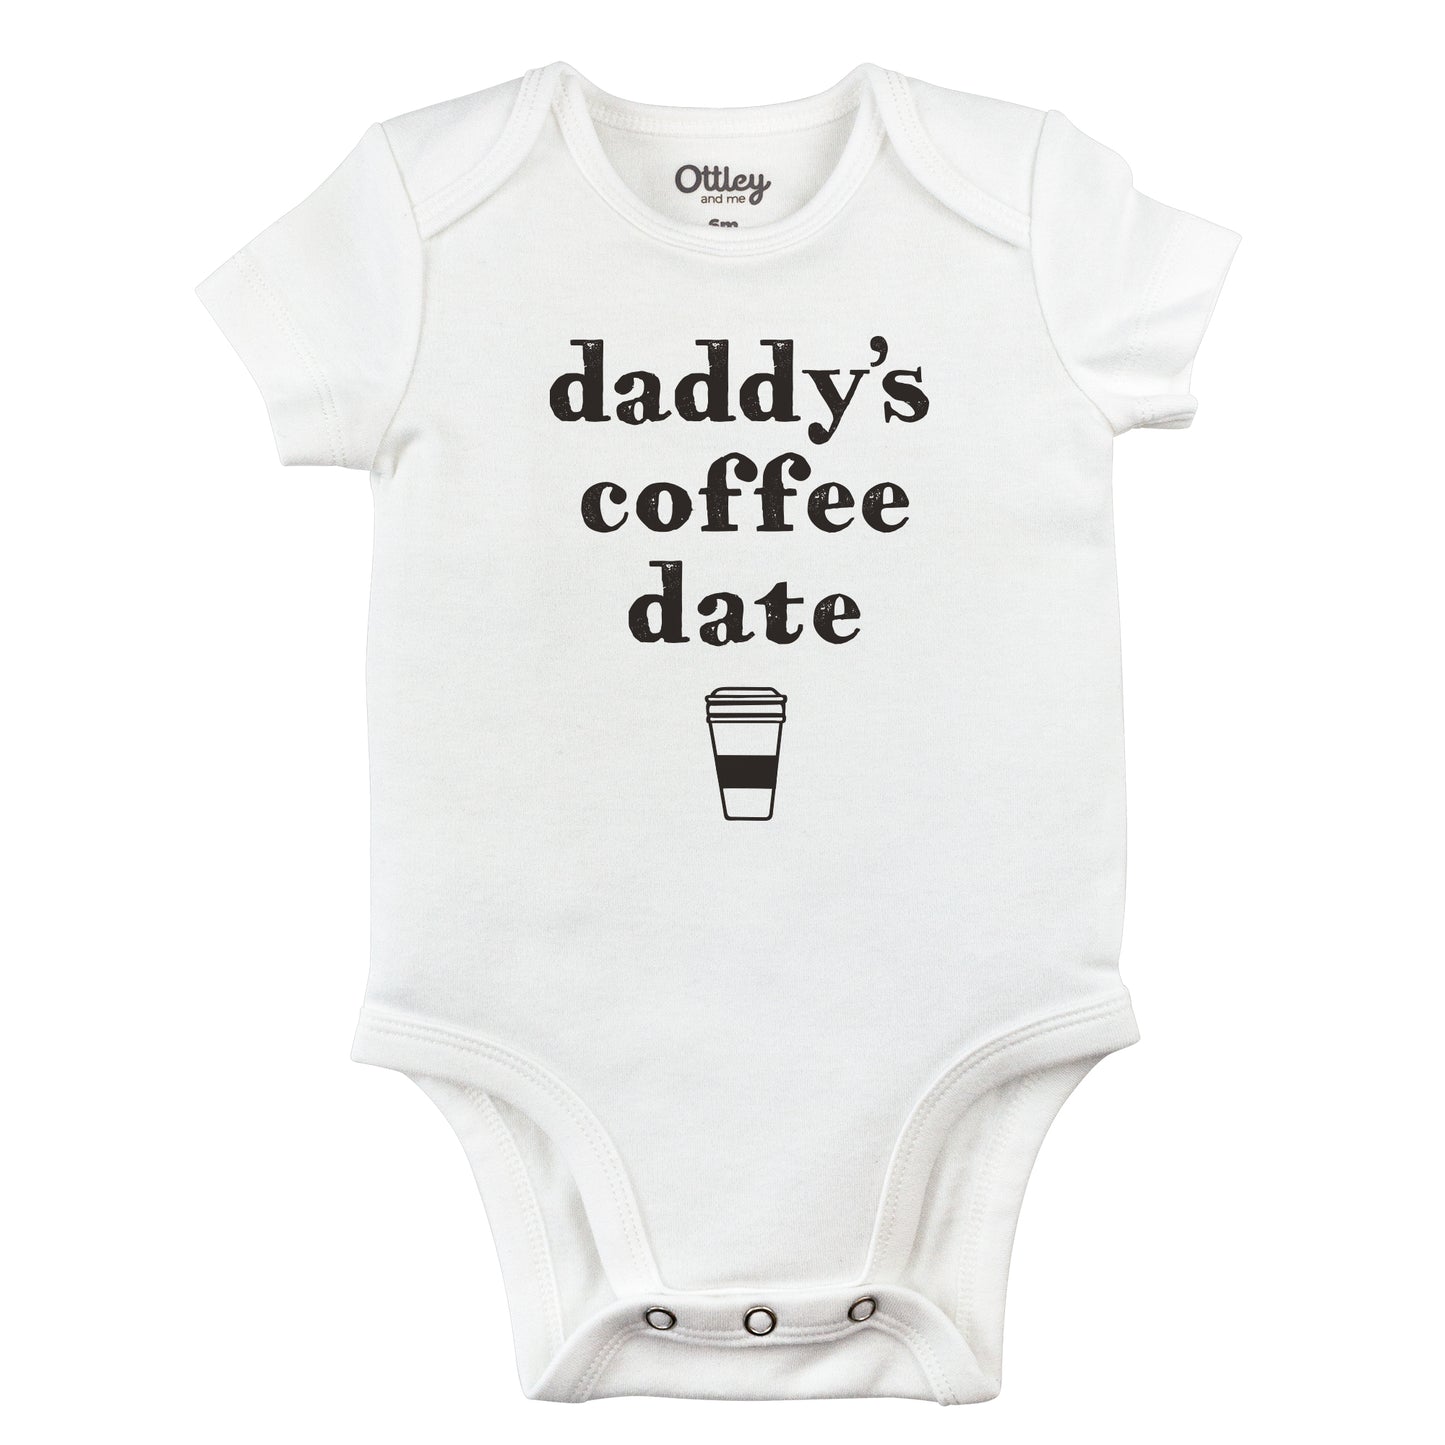 daddy's coffee date